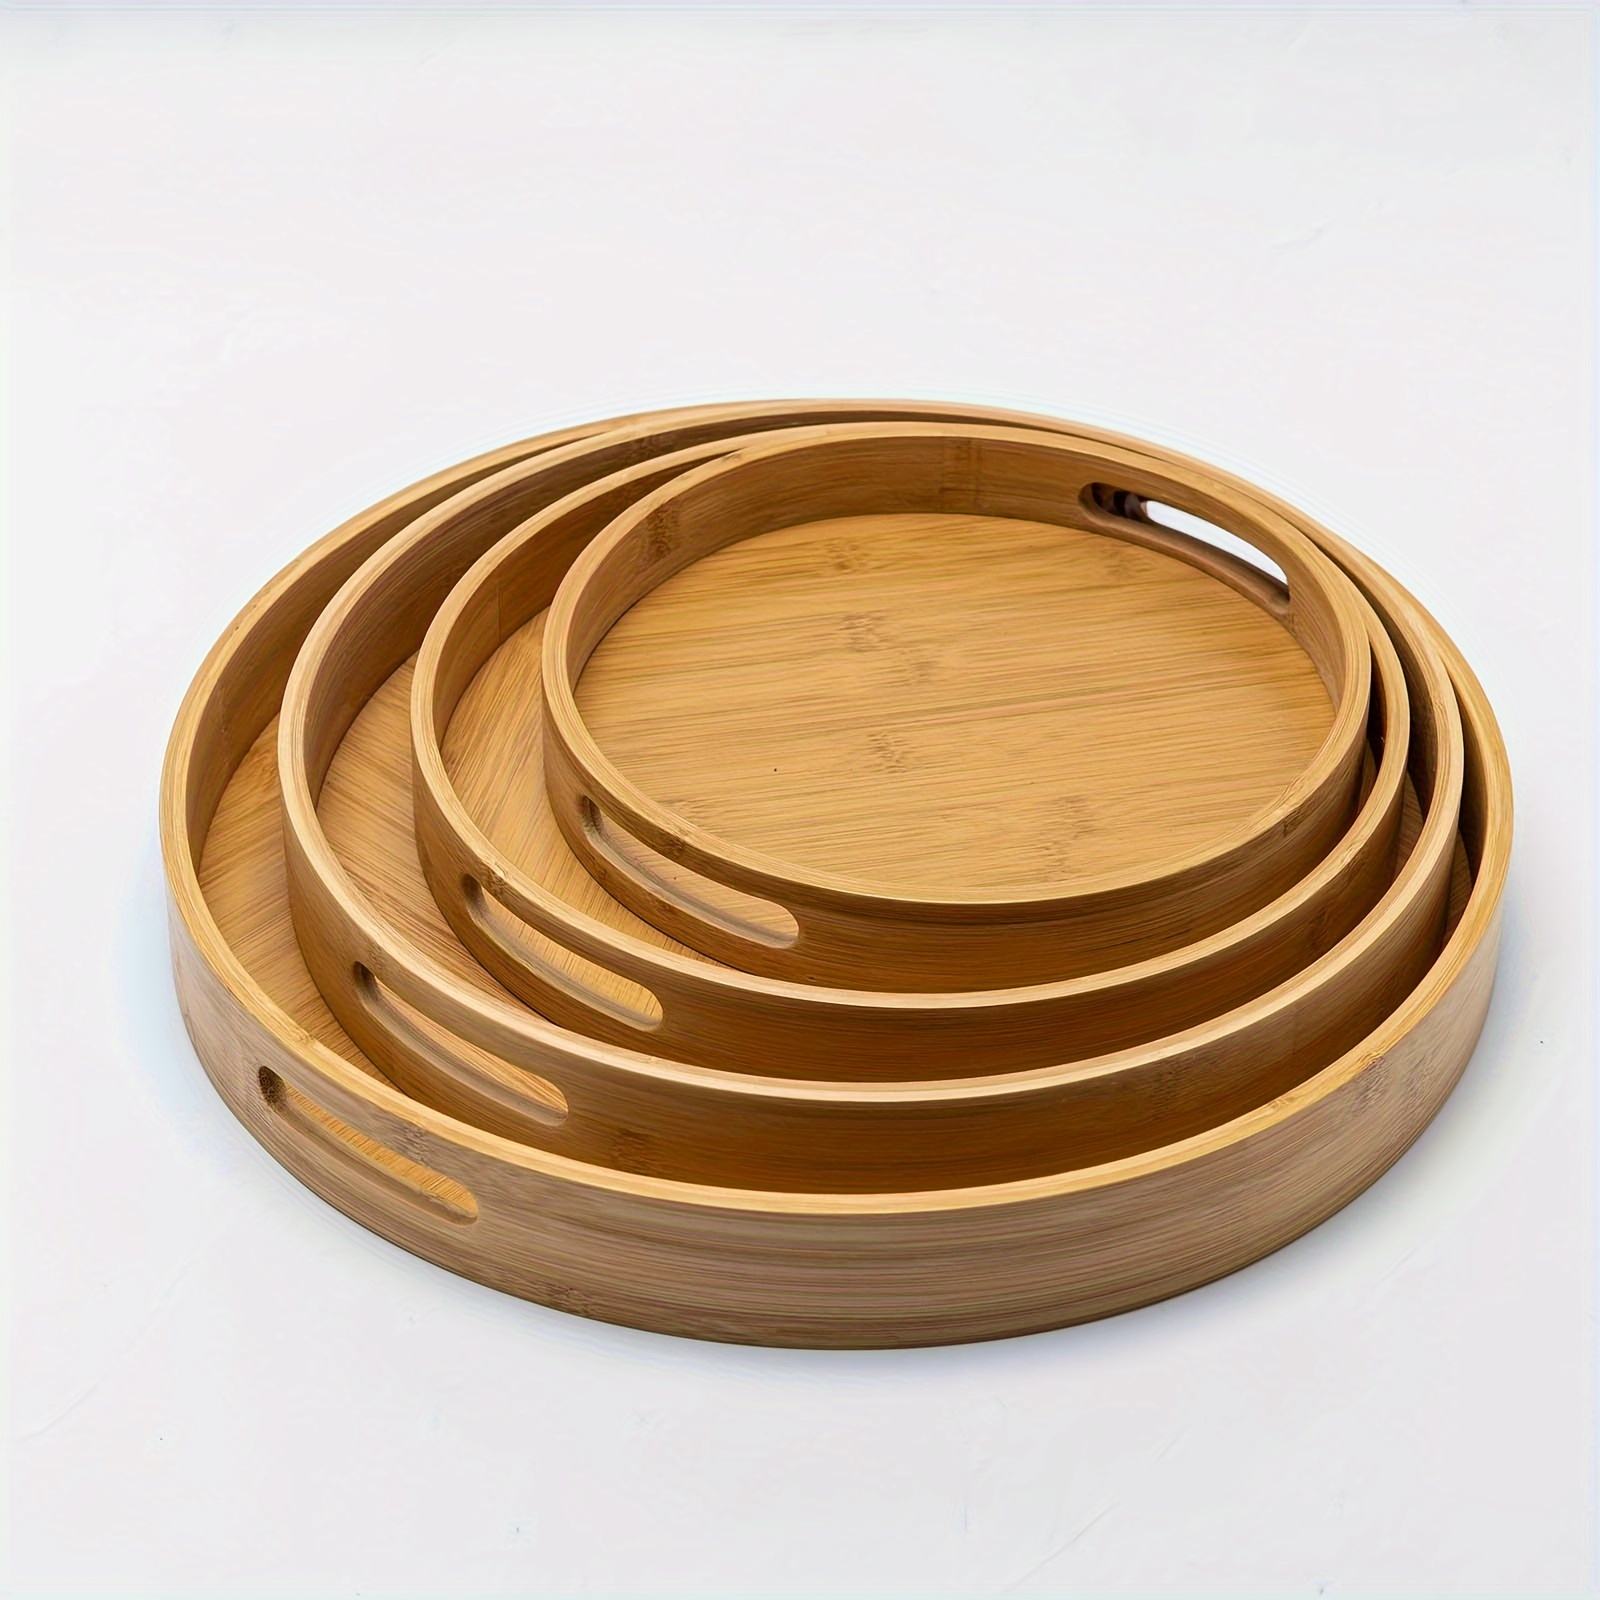 

1pc, Bamboo Wood Round Serving Tray Set With Handles, Stackable Circle Ottoman Trays For Eating, Entertaining, Decorating, And Organizing